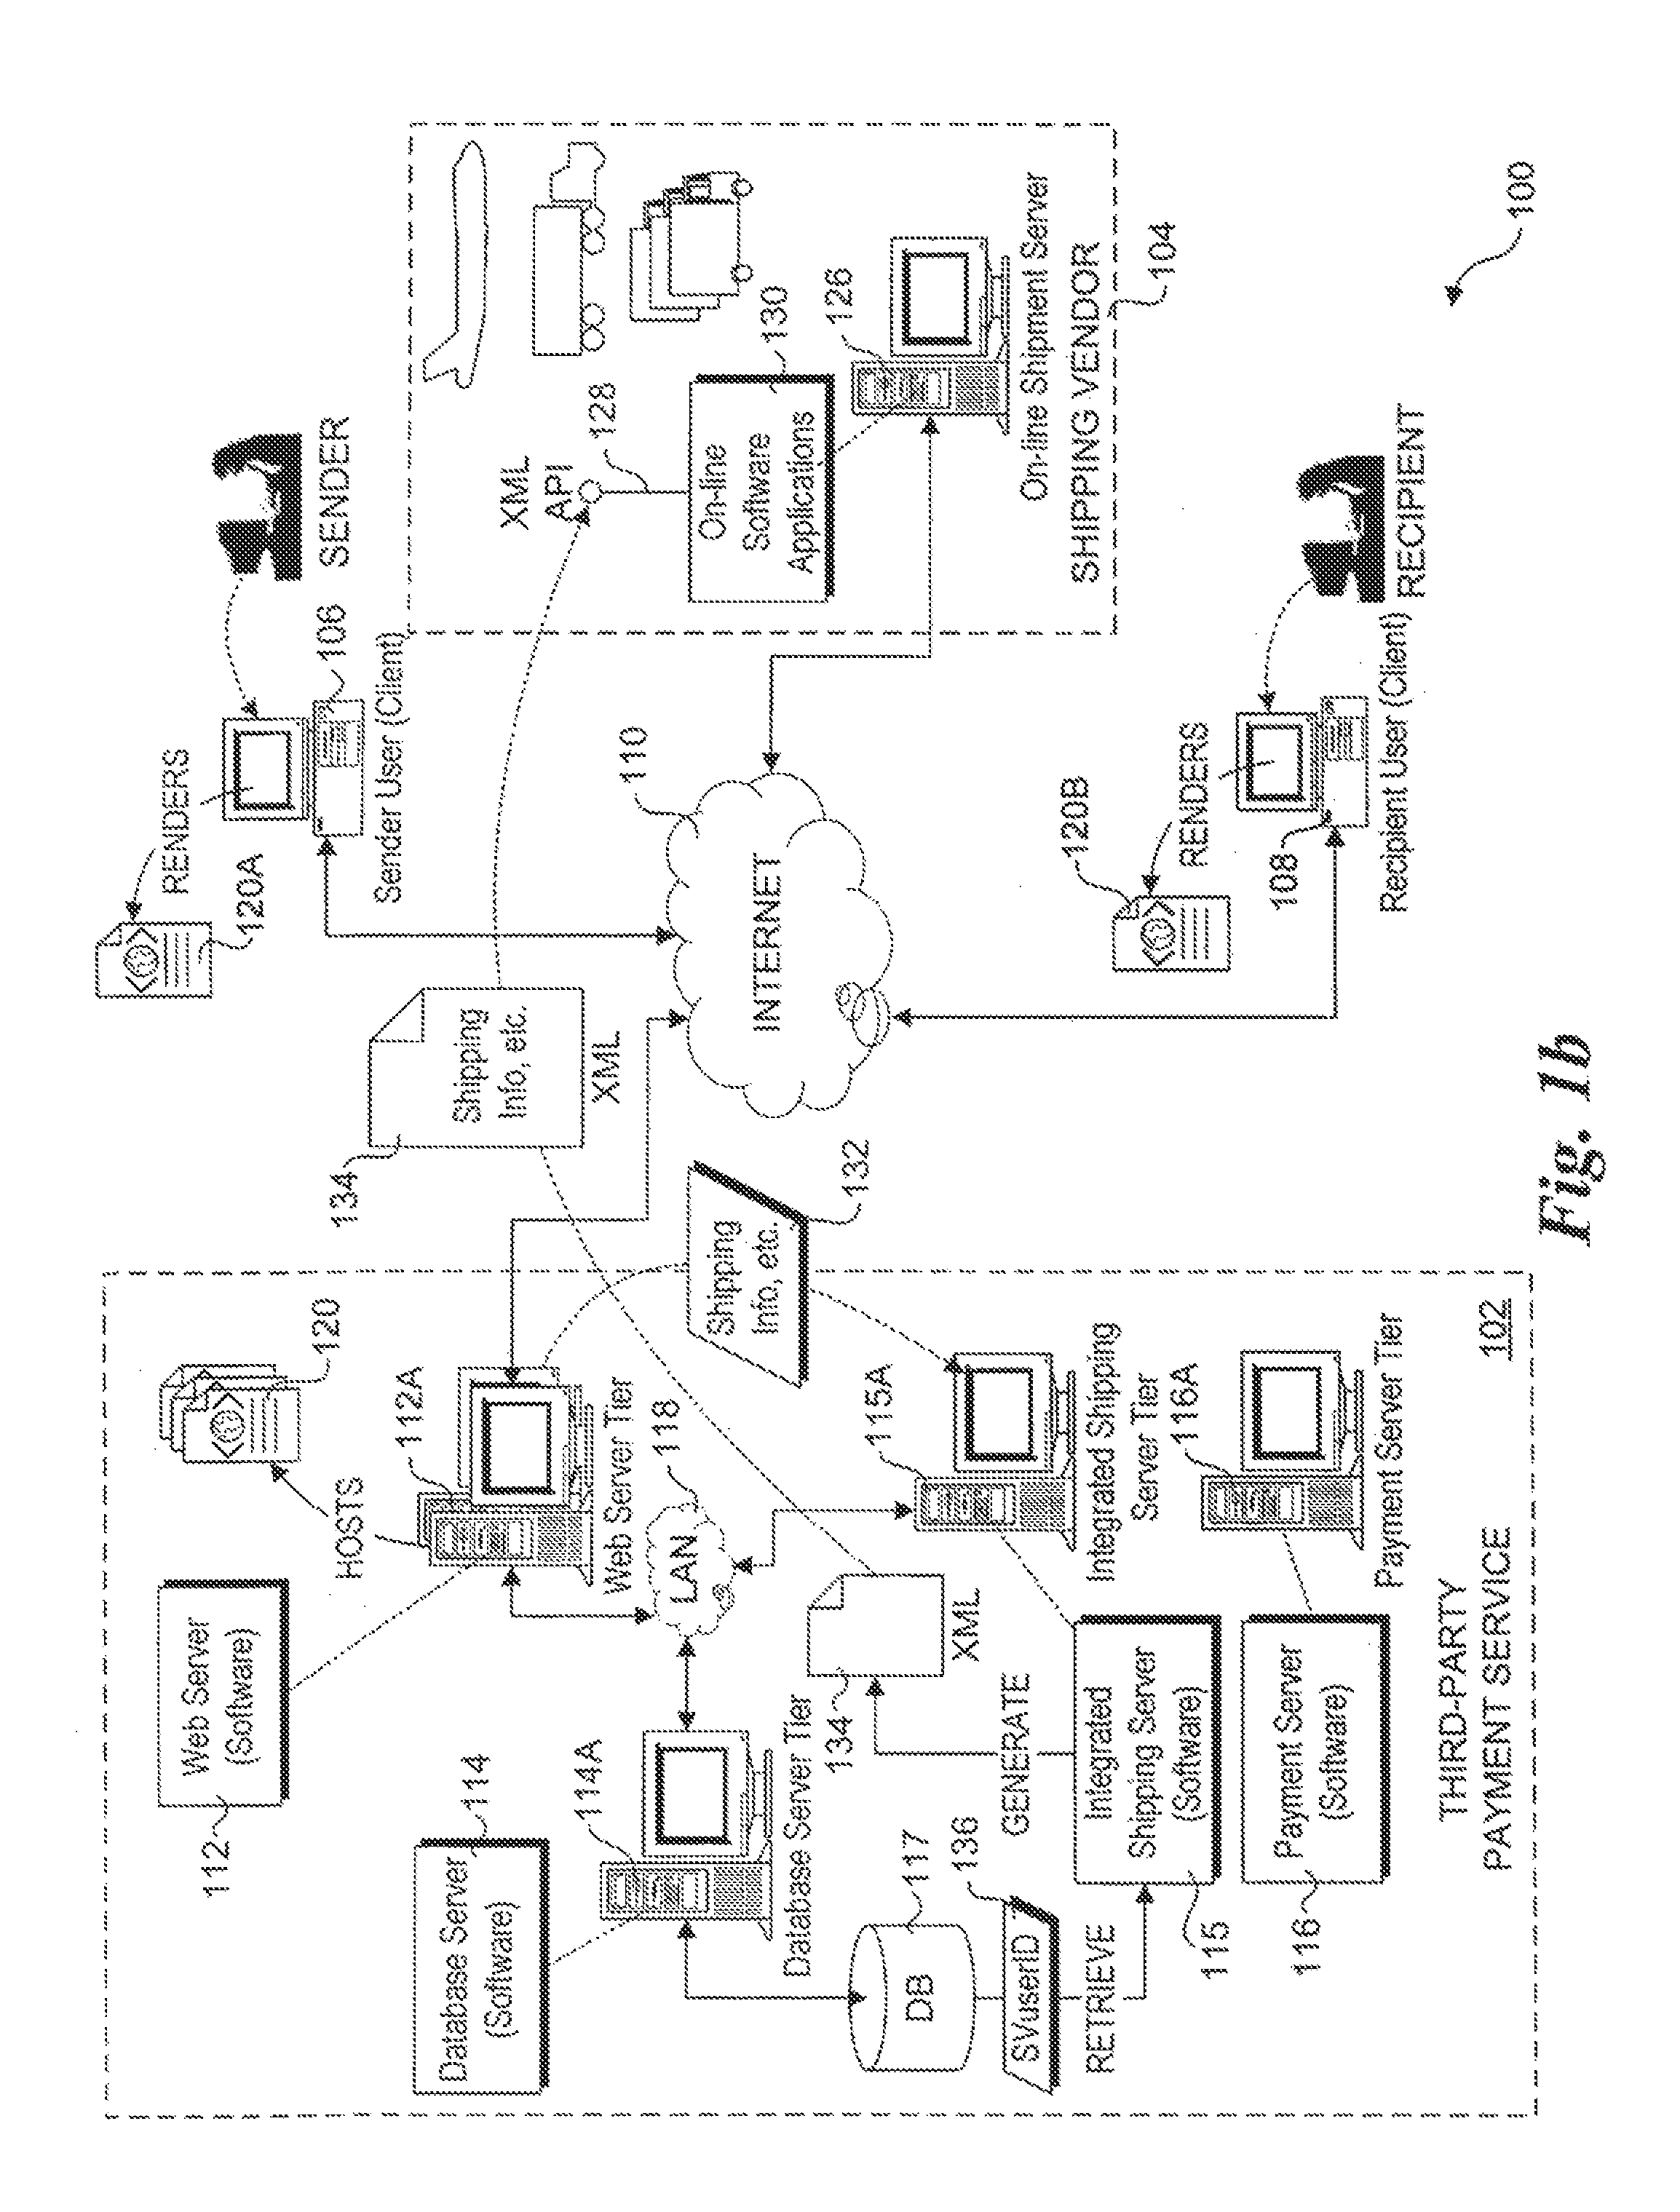 Method and system for facilitating shipping via a third-party payment service